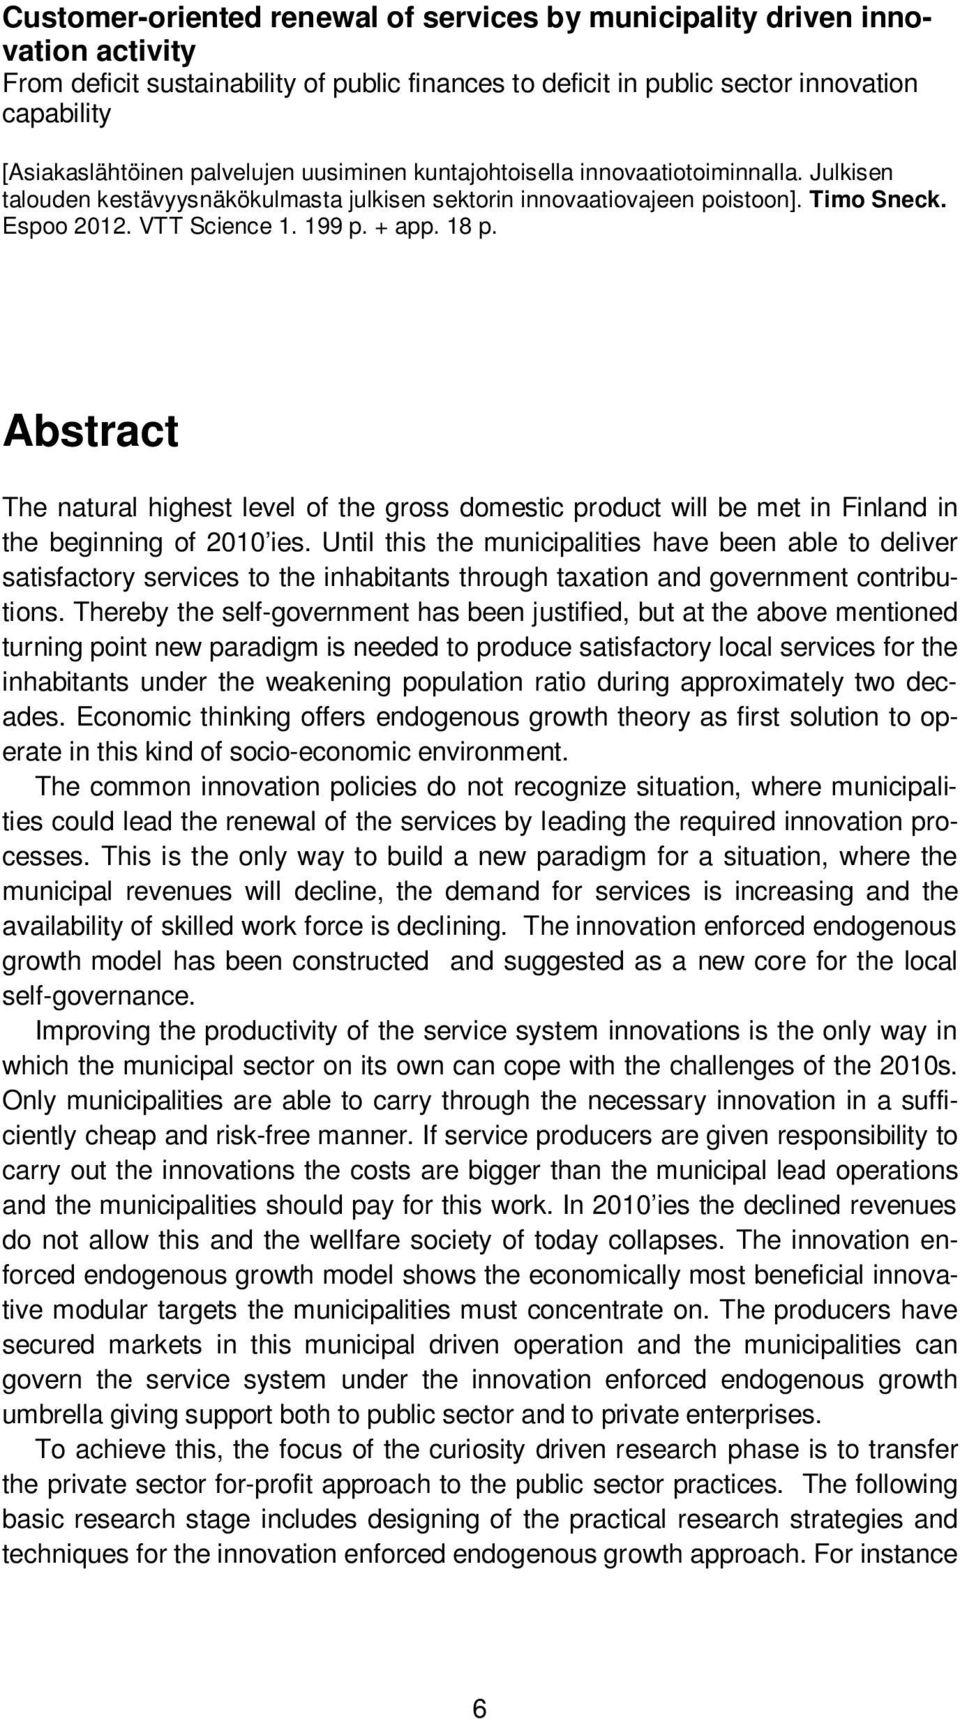 18 p. Abstract The natural highest level of the gross domestic product will be met in Finland in the beginning of 2010 ies.